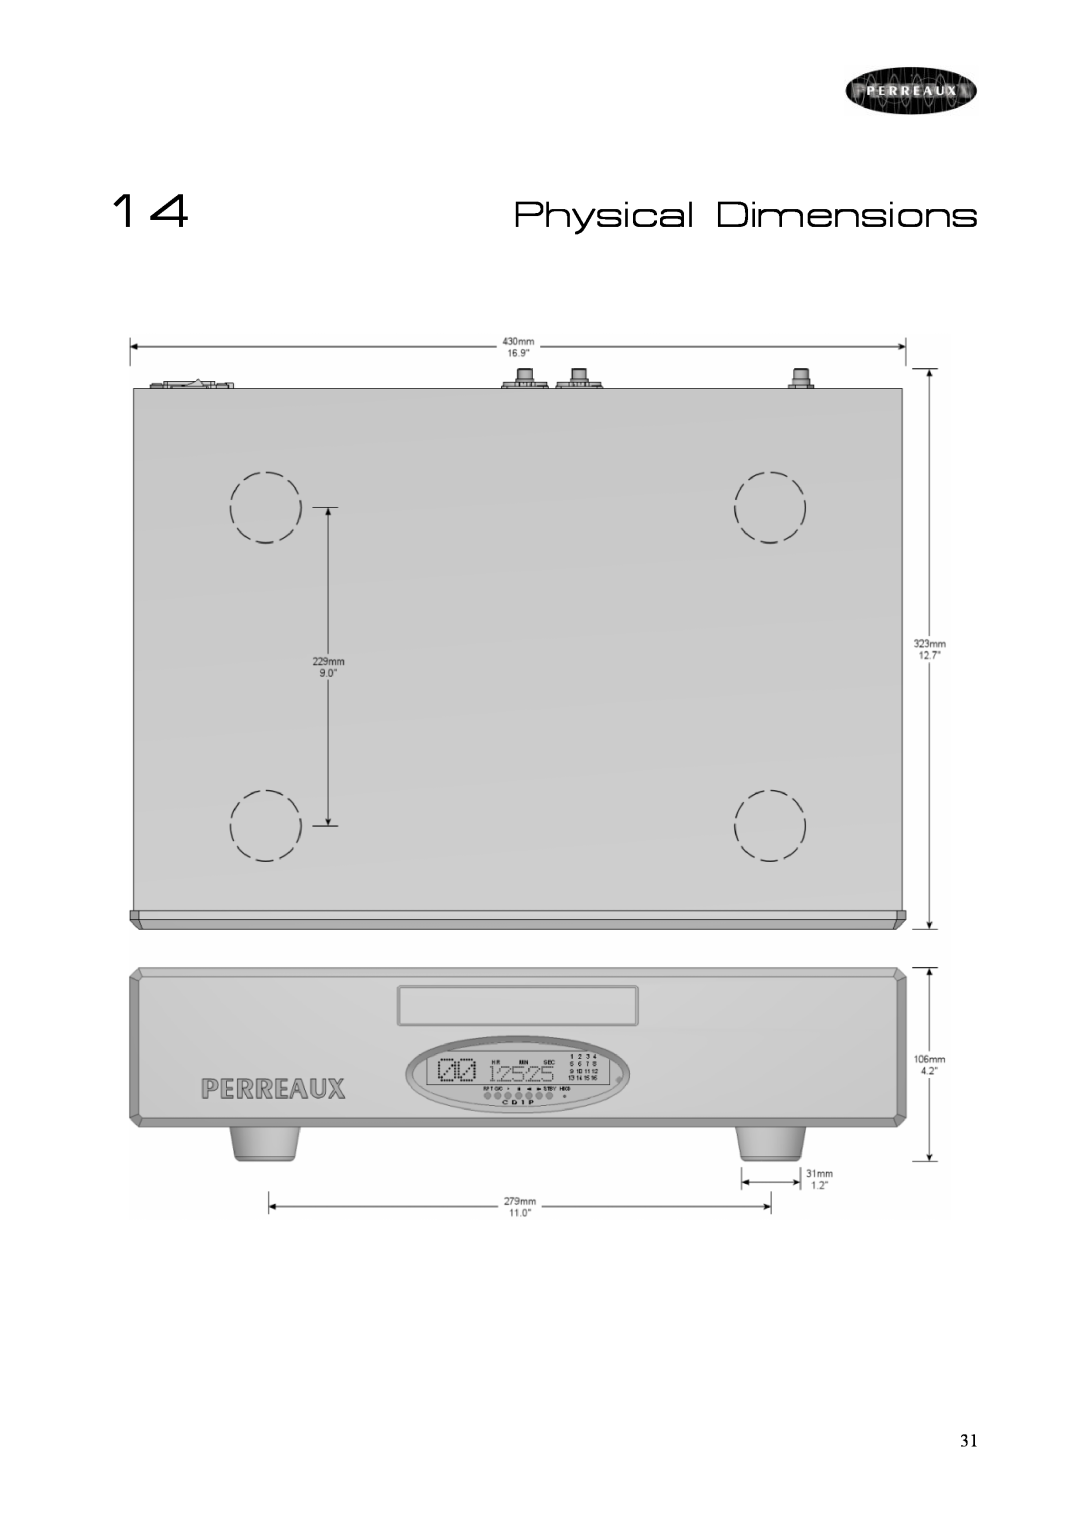 Perreaux CD Player owner manual Physical Dimensions 